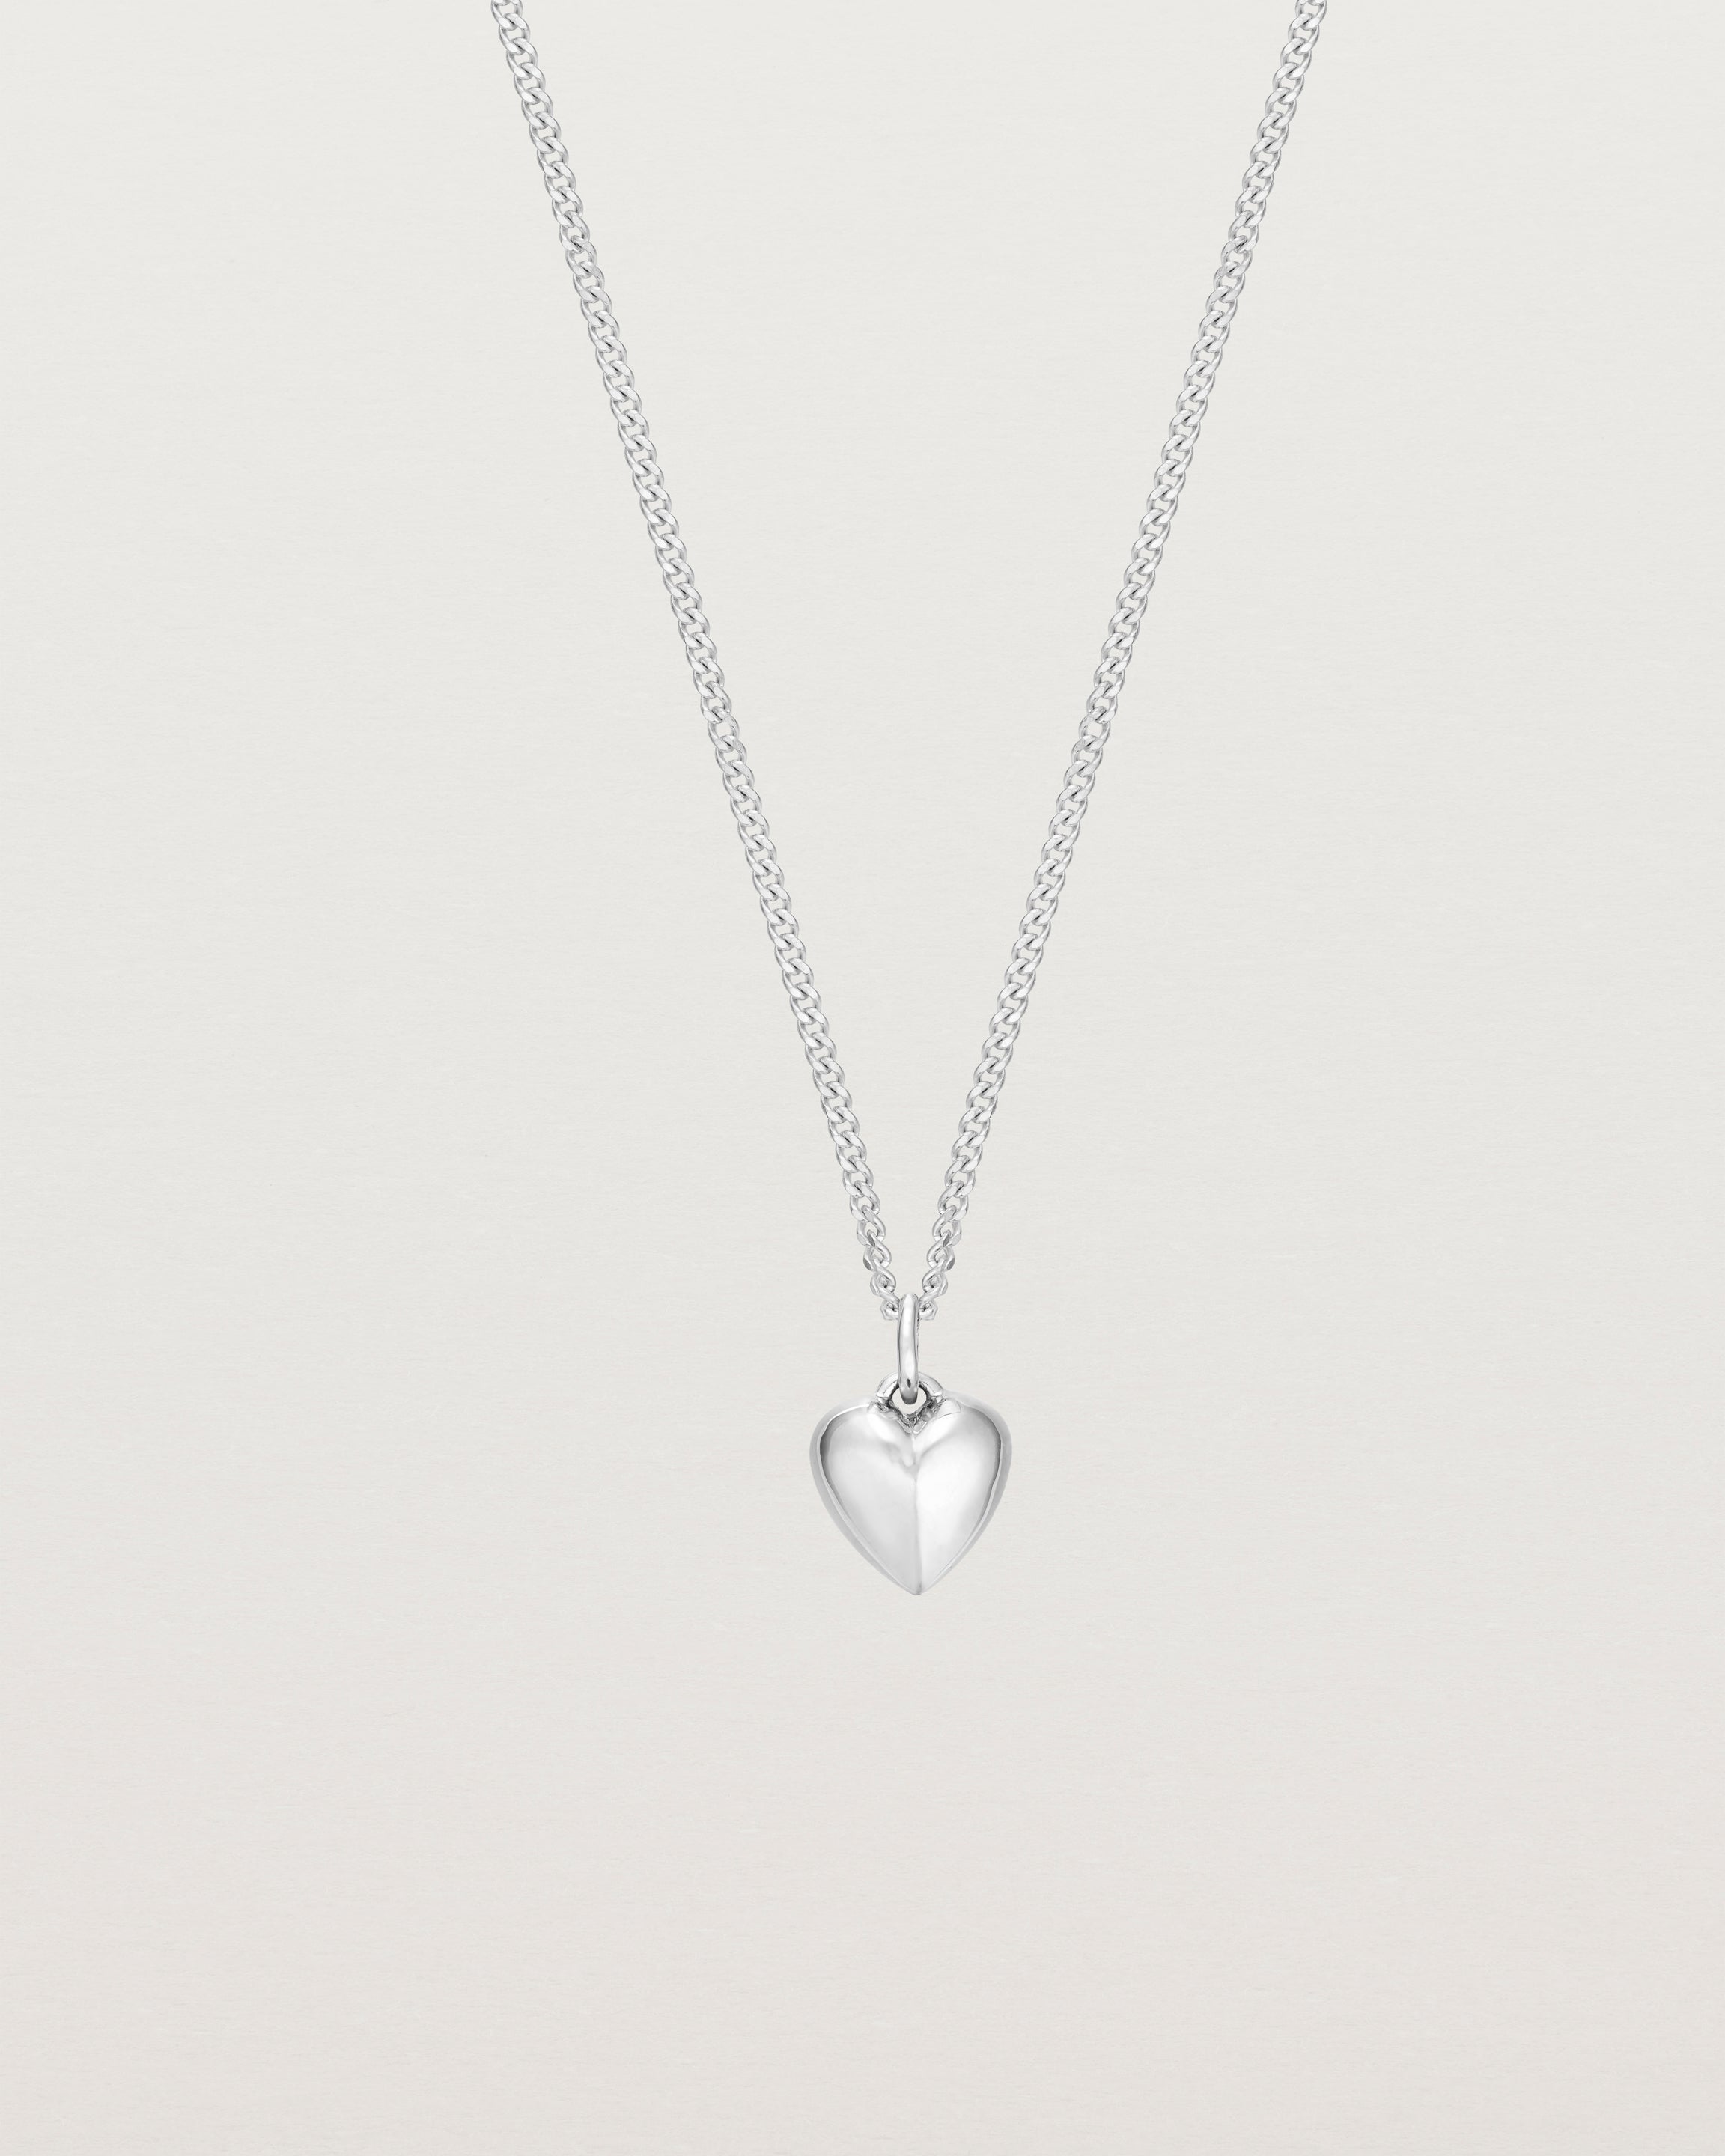 Front image of the heart ella necklace in sterling silver.